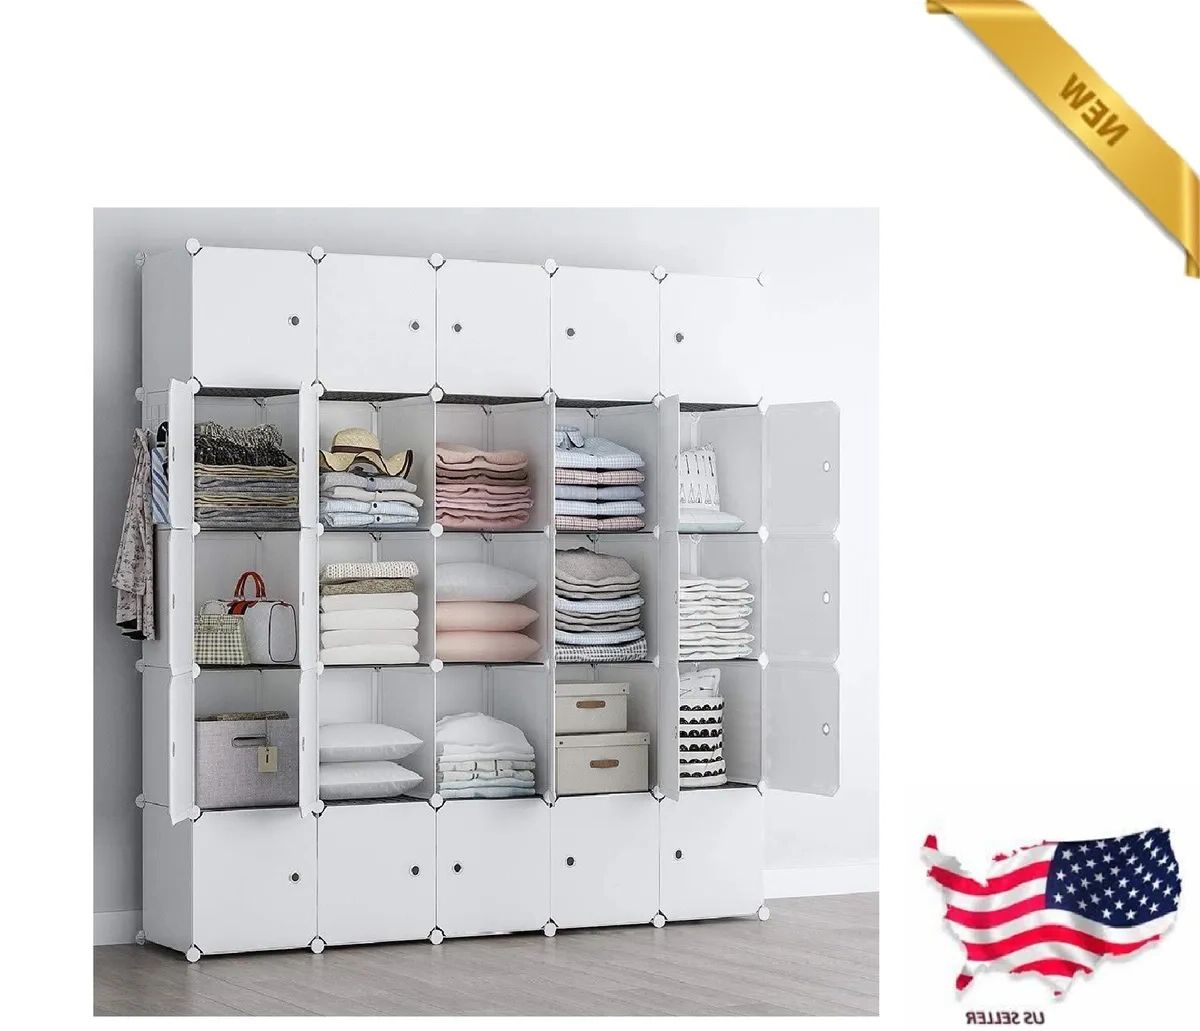 Cube Storage Organzier Portable Closet Wardrobe Bedroom Dresser 25 Cubes  White | Ebay Within Wardrobes With Cube Compartments (Gallery 10 of 20)